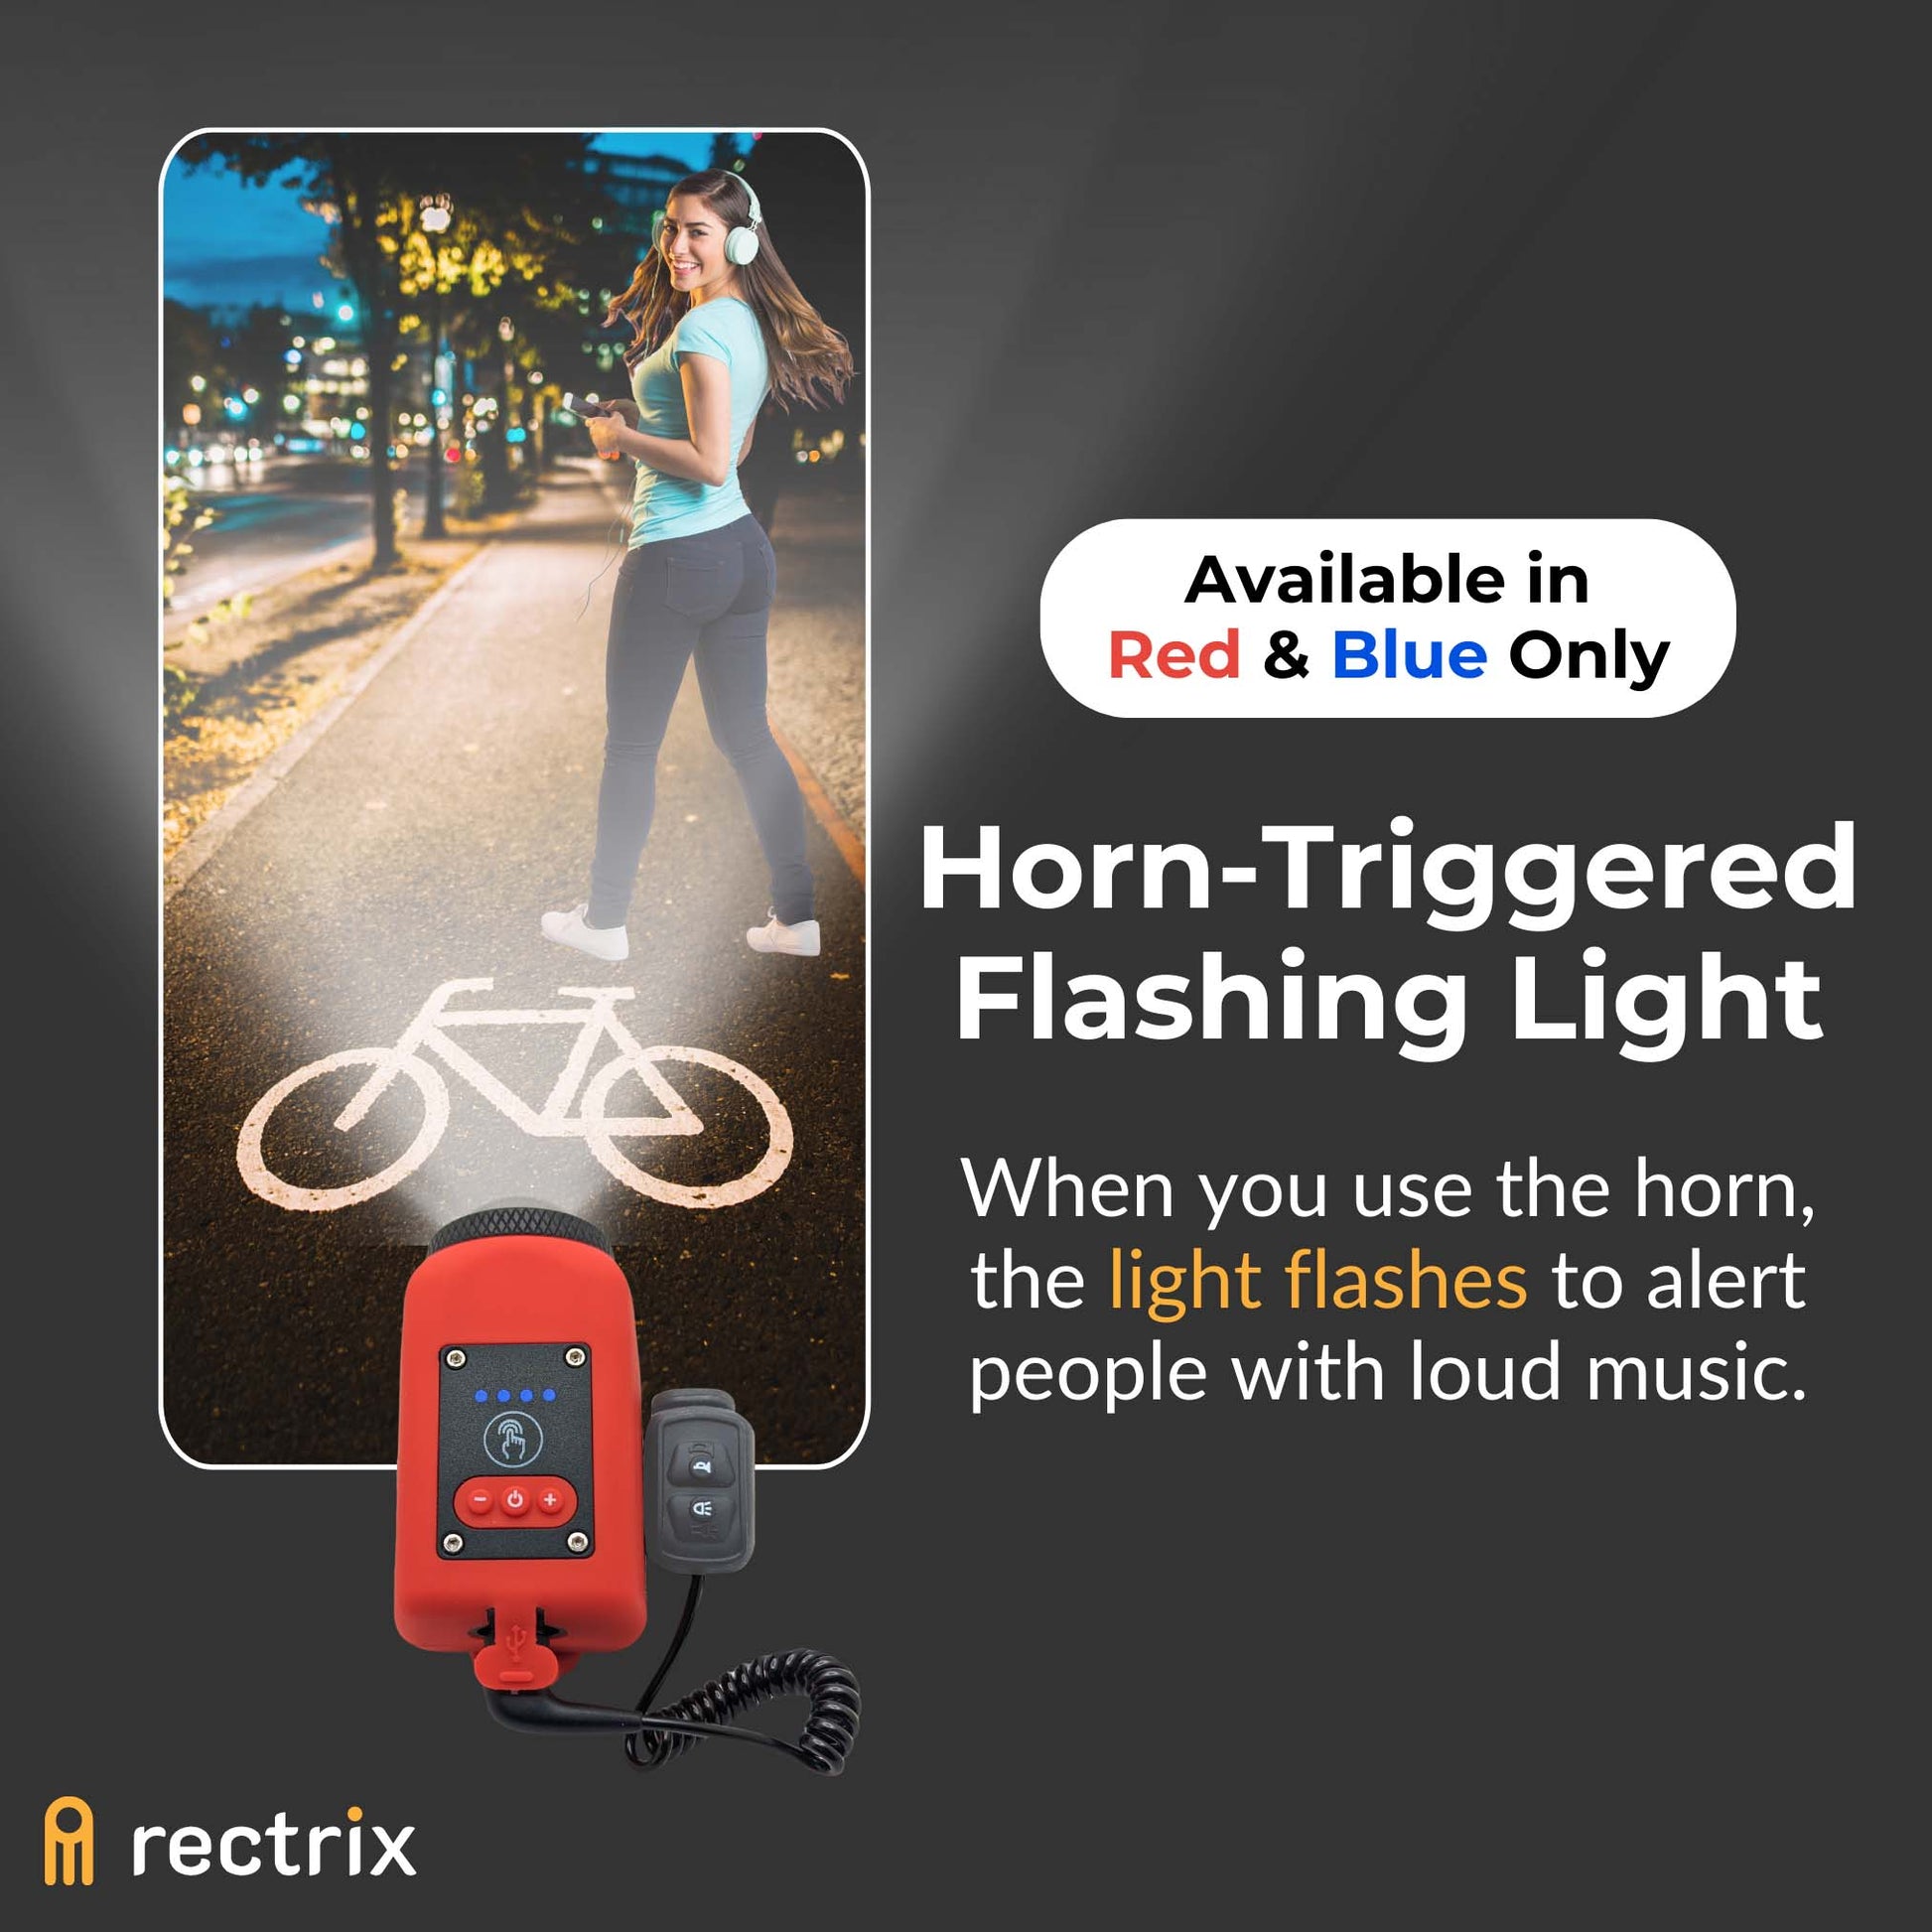 Bike horn flashes light when user activates the horn to alert individuals, especially those with loud music